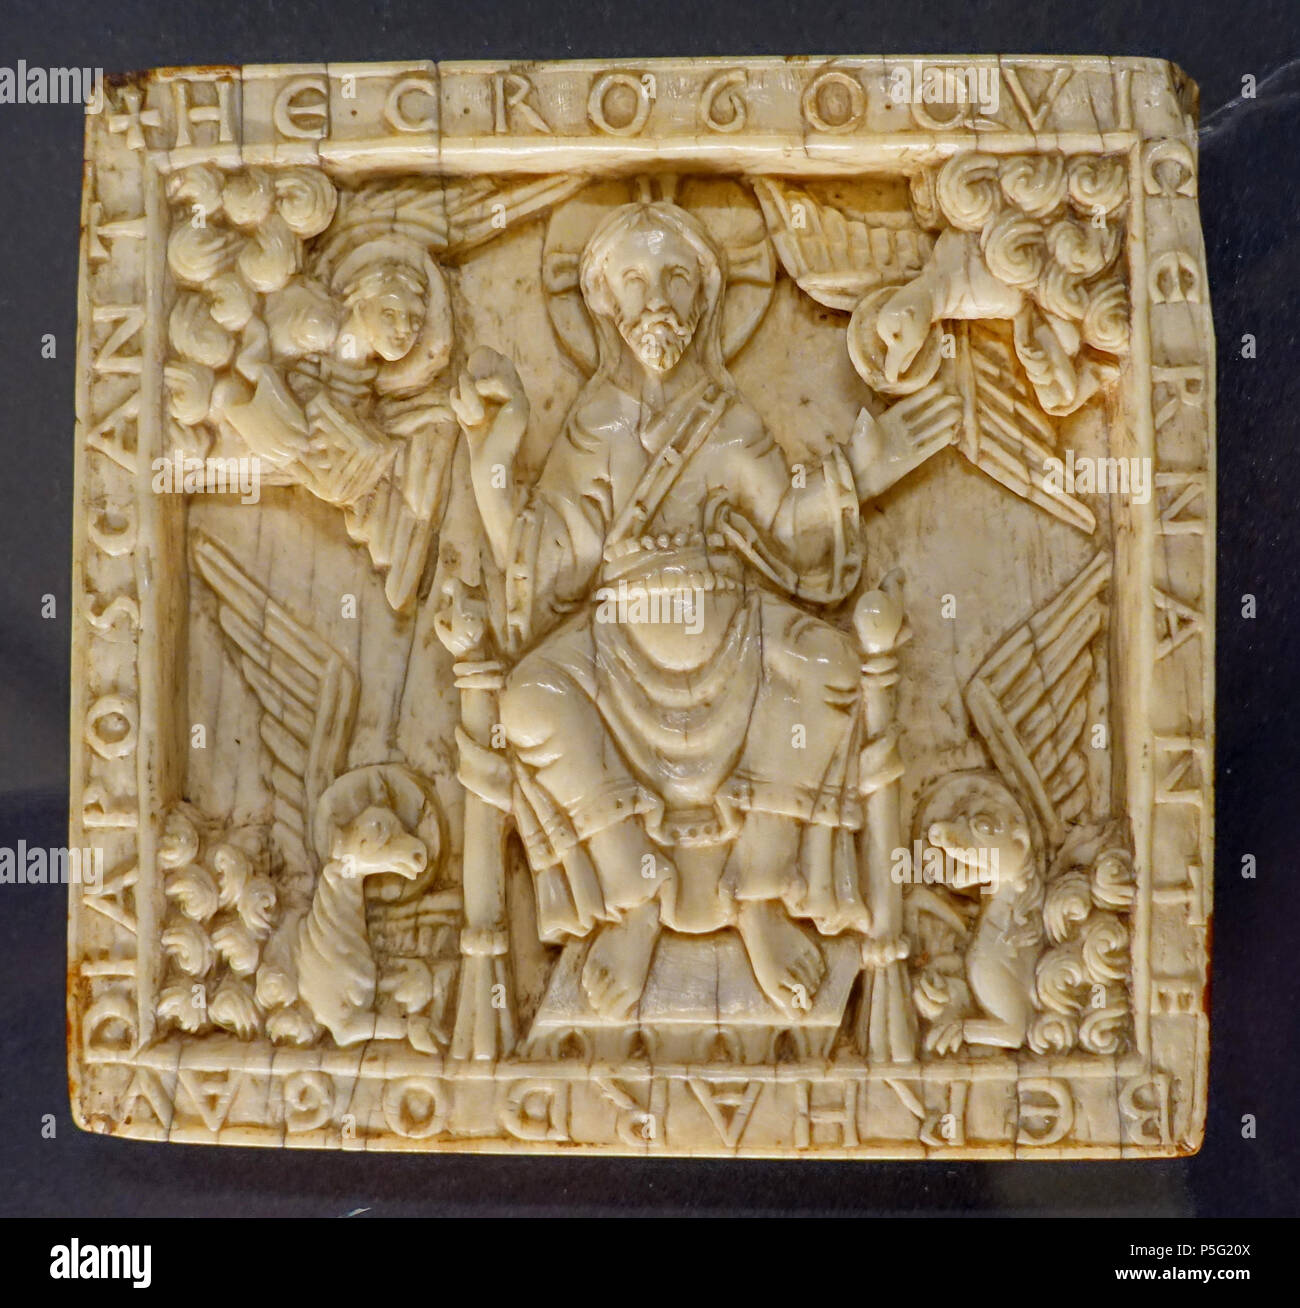 N/A. English: Exhibit in the Hessisches Landesmuseum Darmstadt - Darmstadt, Germany. 19 October 2016, 05:34:56. Daderot 343 Christ in Majesty with the evangelist symbols, Trier or southwestern Germany, 1100-1150 AD, ivory - Hessisches Landesmuseum Darmstadt - Darmstadt, Germany - DSC00302 Stock Photo